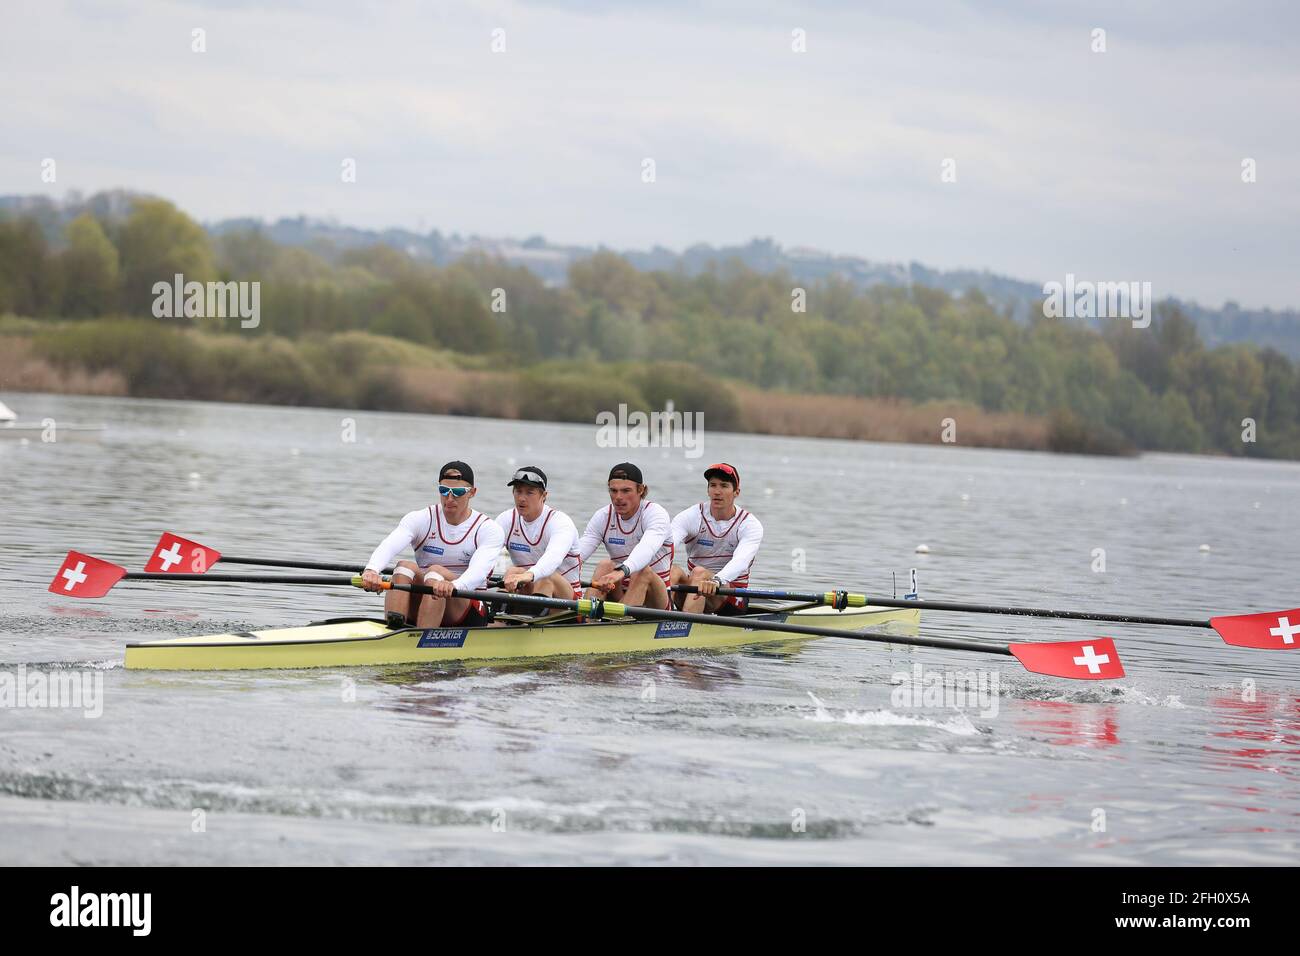 Markus Kessler, Paul Jacquot, Joel Schuerch and Andrin Gulich of Switzerland compete in the Men's Four Semifinal A/B 1 on Day 2 at the European Rowing Stock Photo